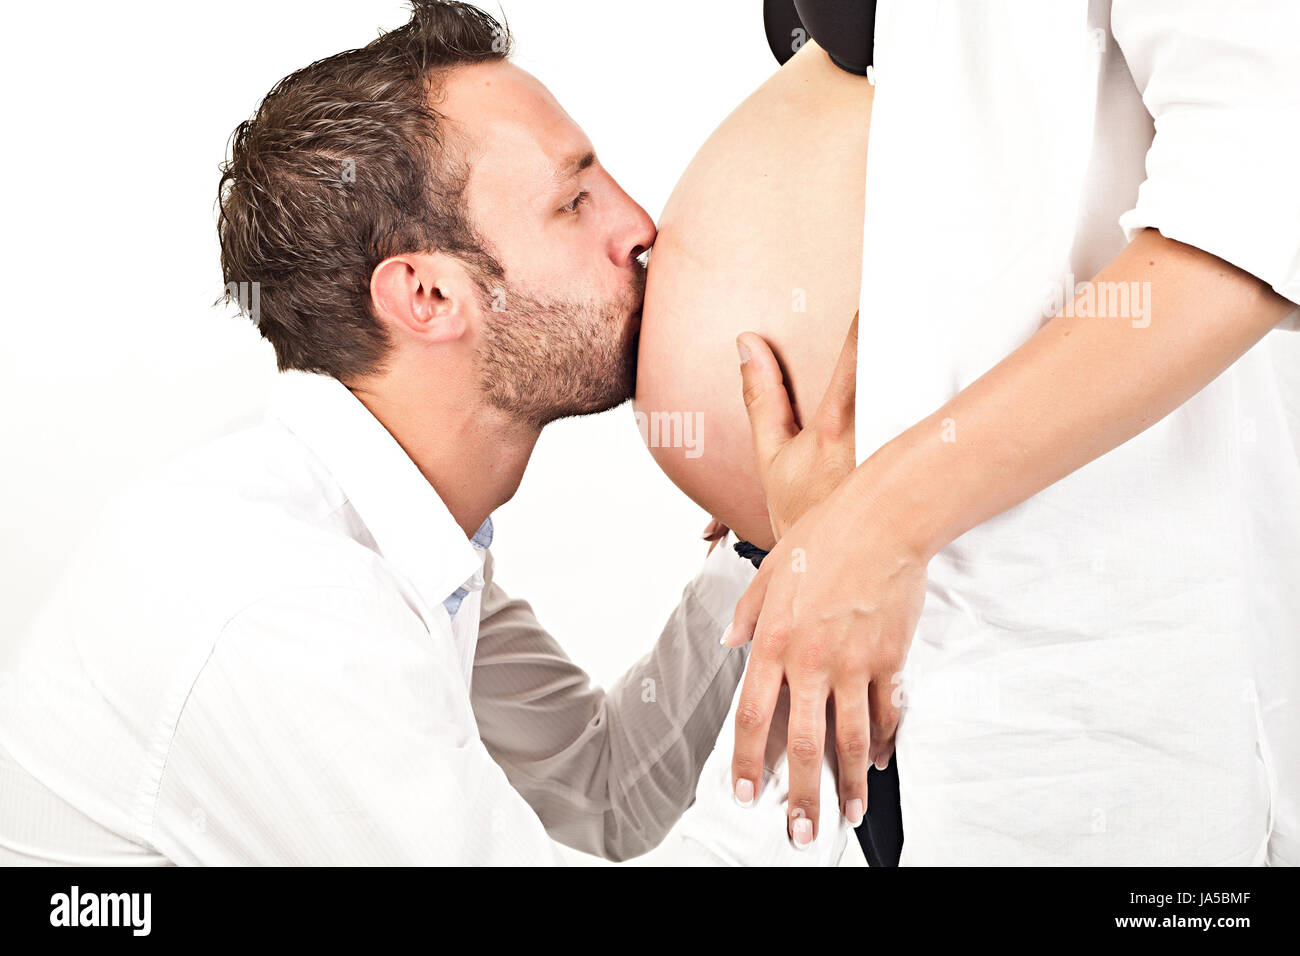 woman, baby, mother, mom, ma, mommy, mothers, pregnancy, expectation, daddies, Stock Photo